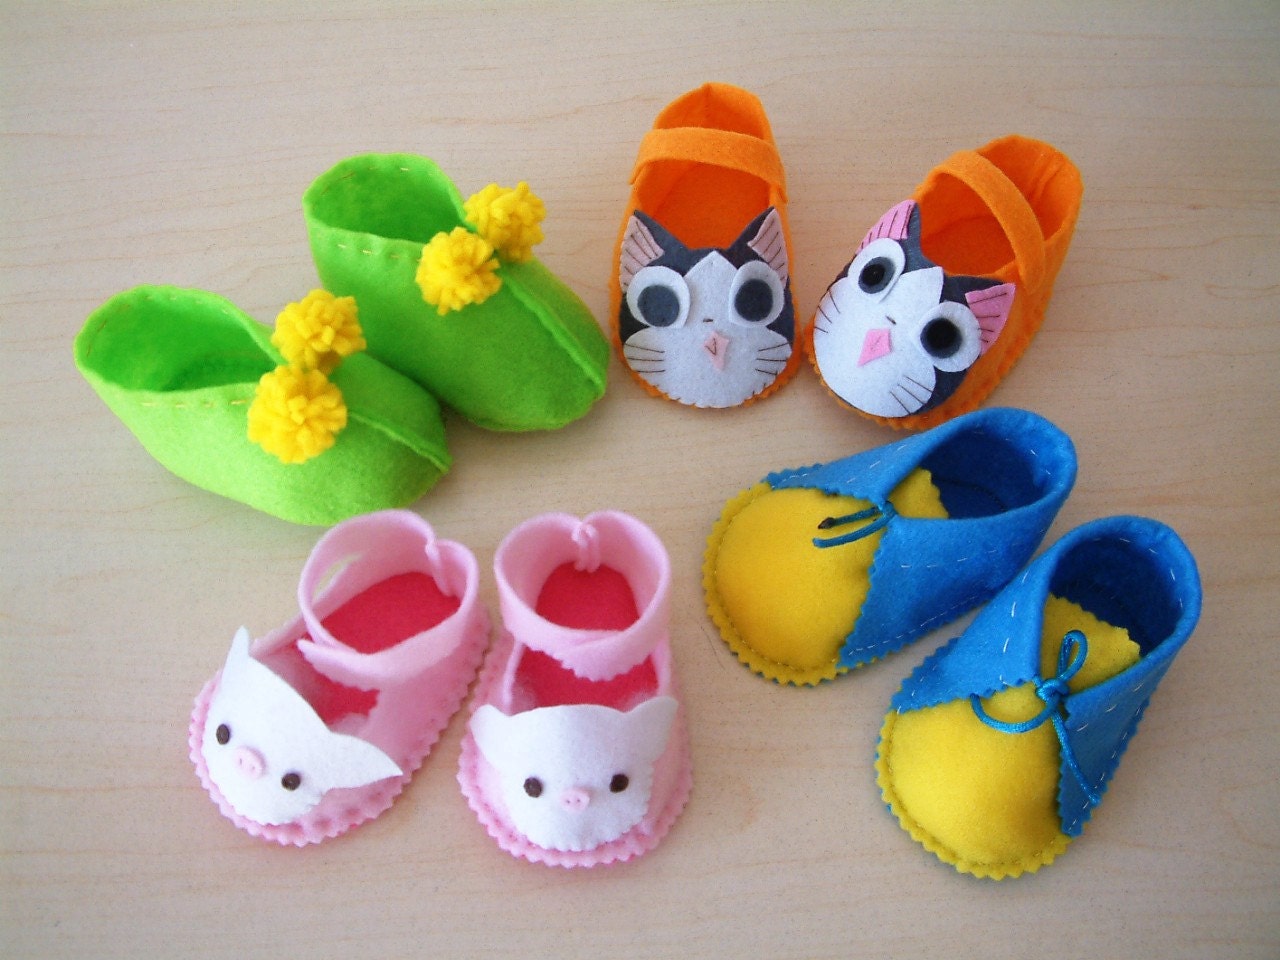 H03(1,2,3,4 Items to   Patterns Baby  Shoe  similar Felt for 10 shoes 4 Sewing 0-3 for months